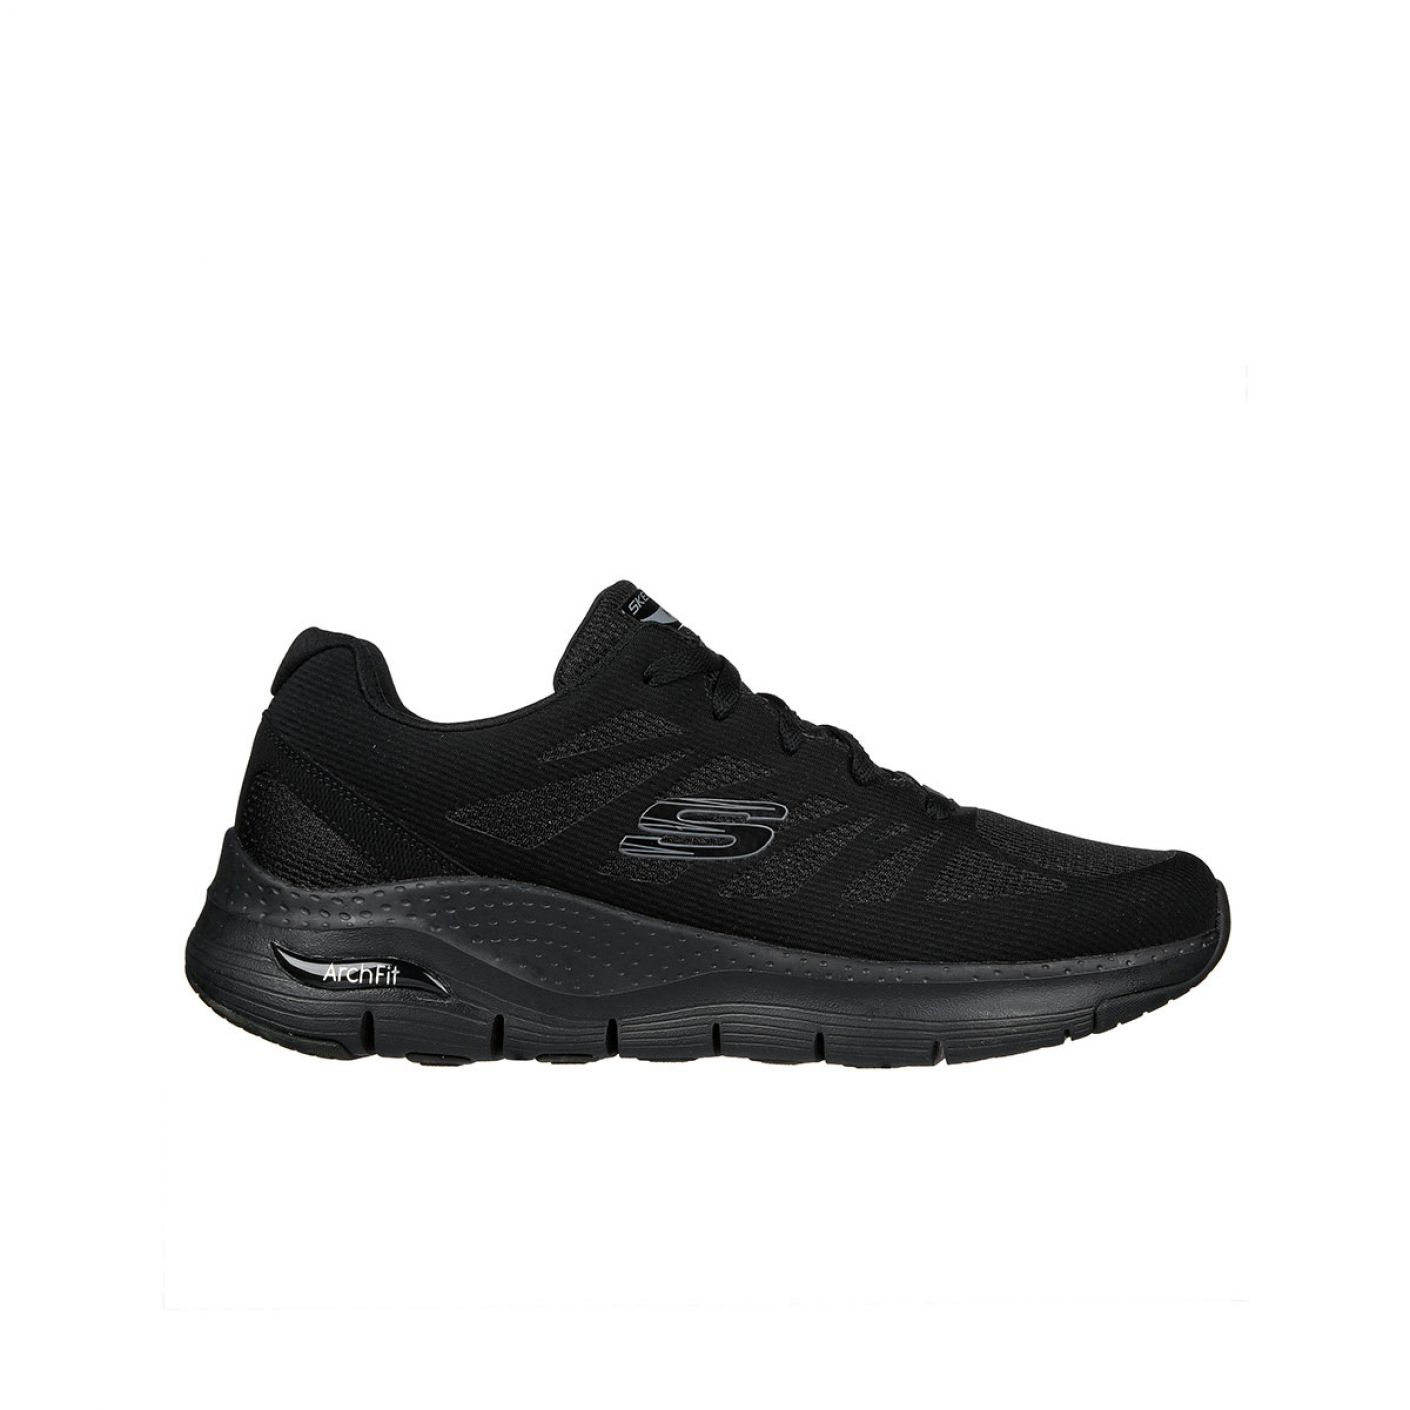 Skechers Arch Fit Charge Back Nere